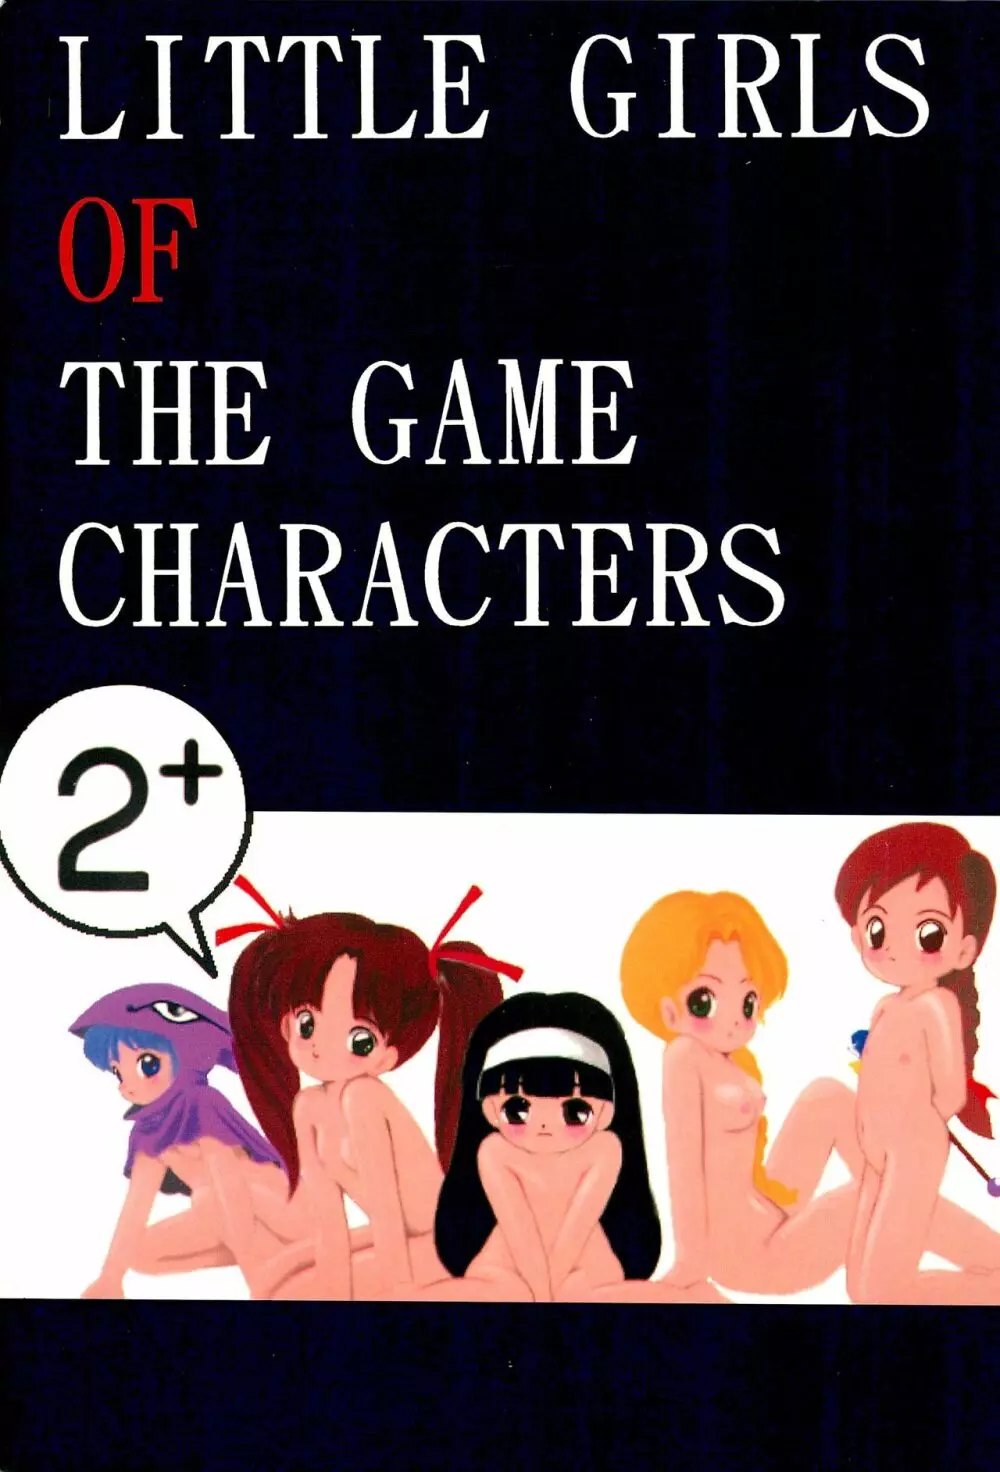 LITTLE GIRLS OF THE GAME CHARACTERS 2+